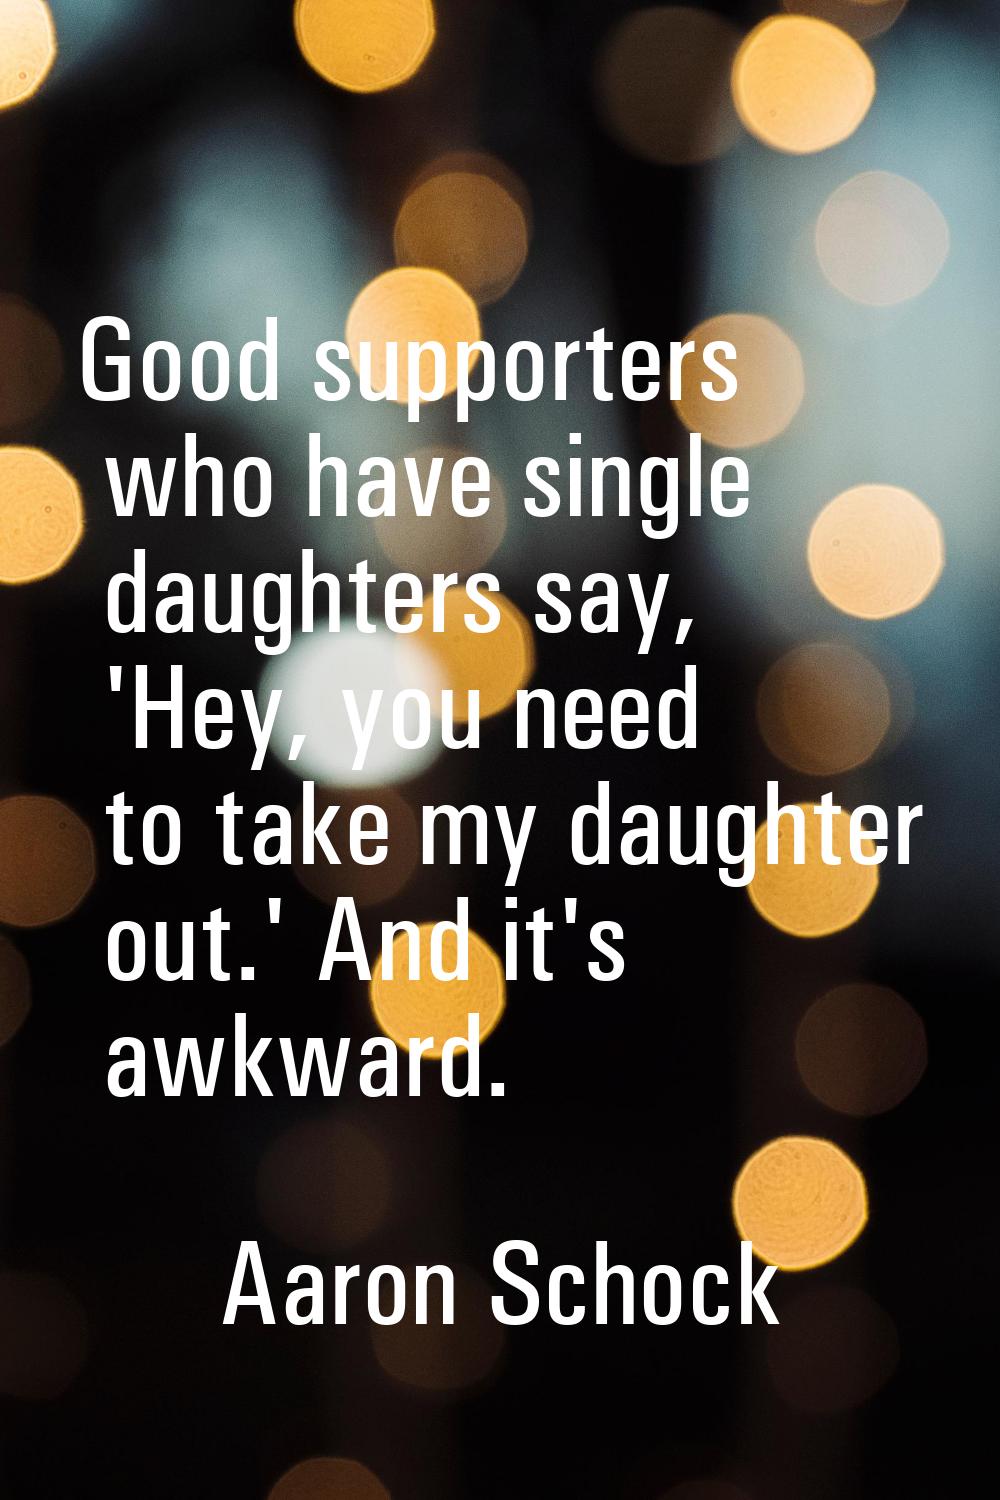 Good supporters who have single daughters say, 'Hey, you need to take my daughter out.' And it's aw